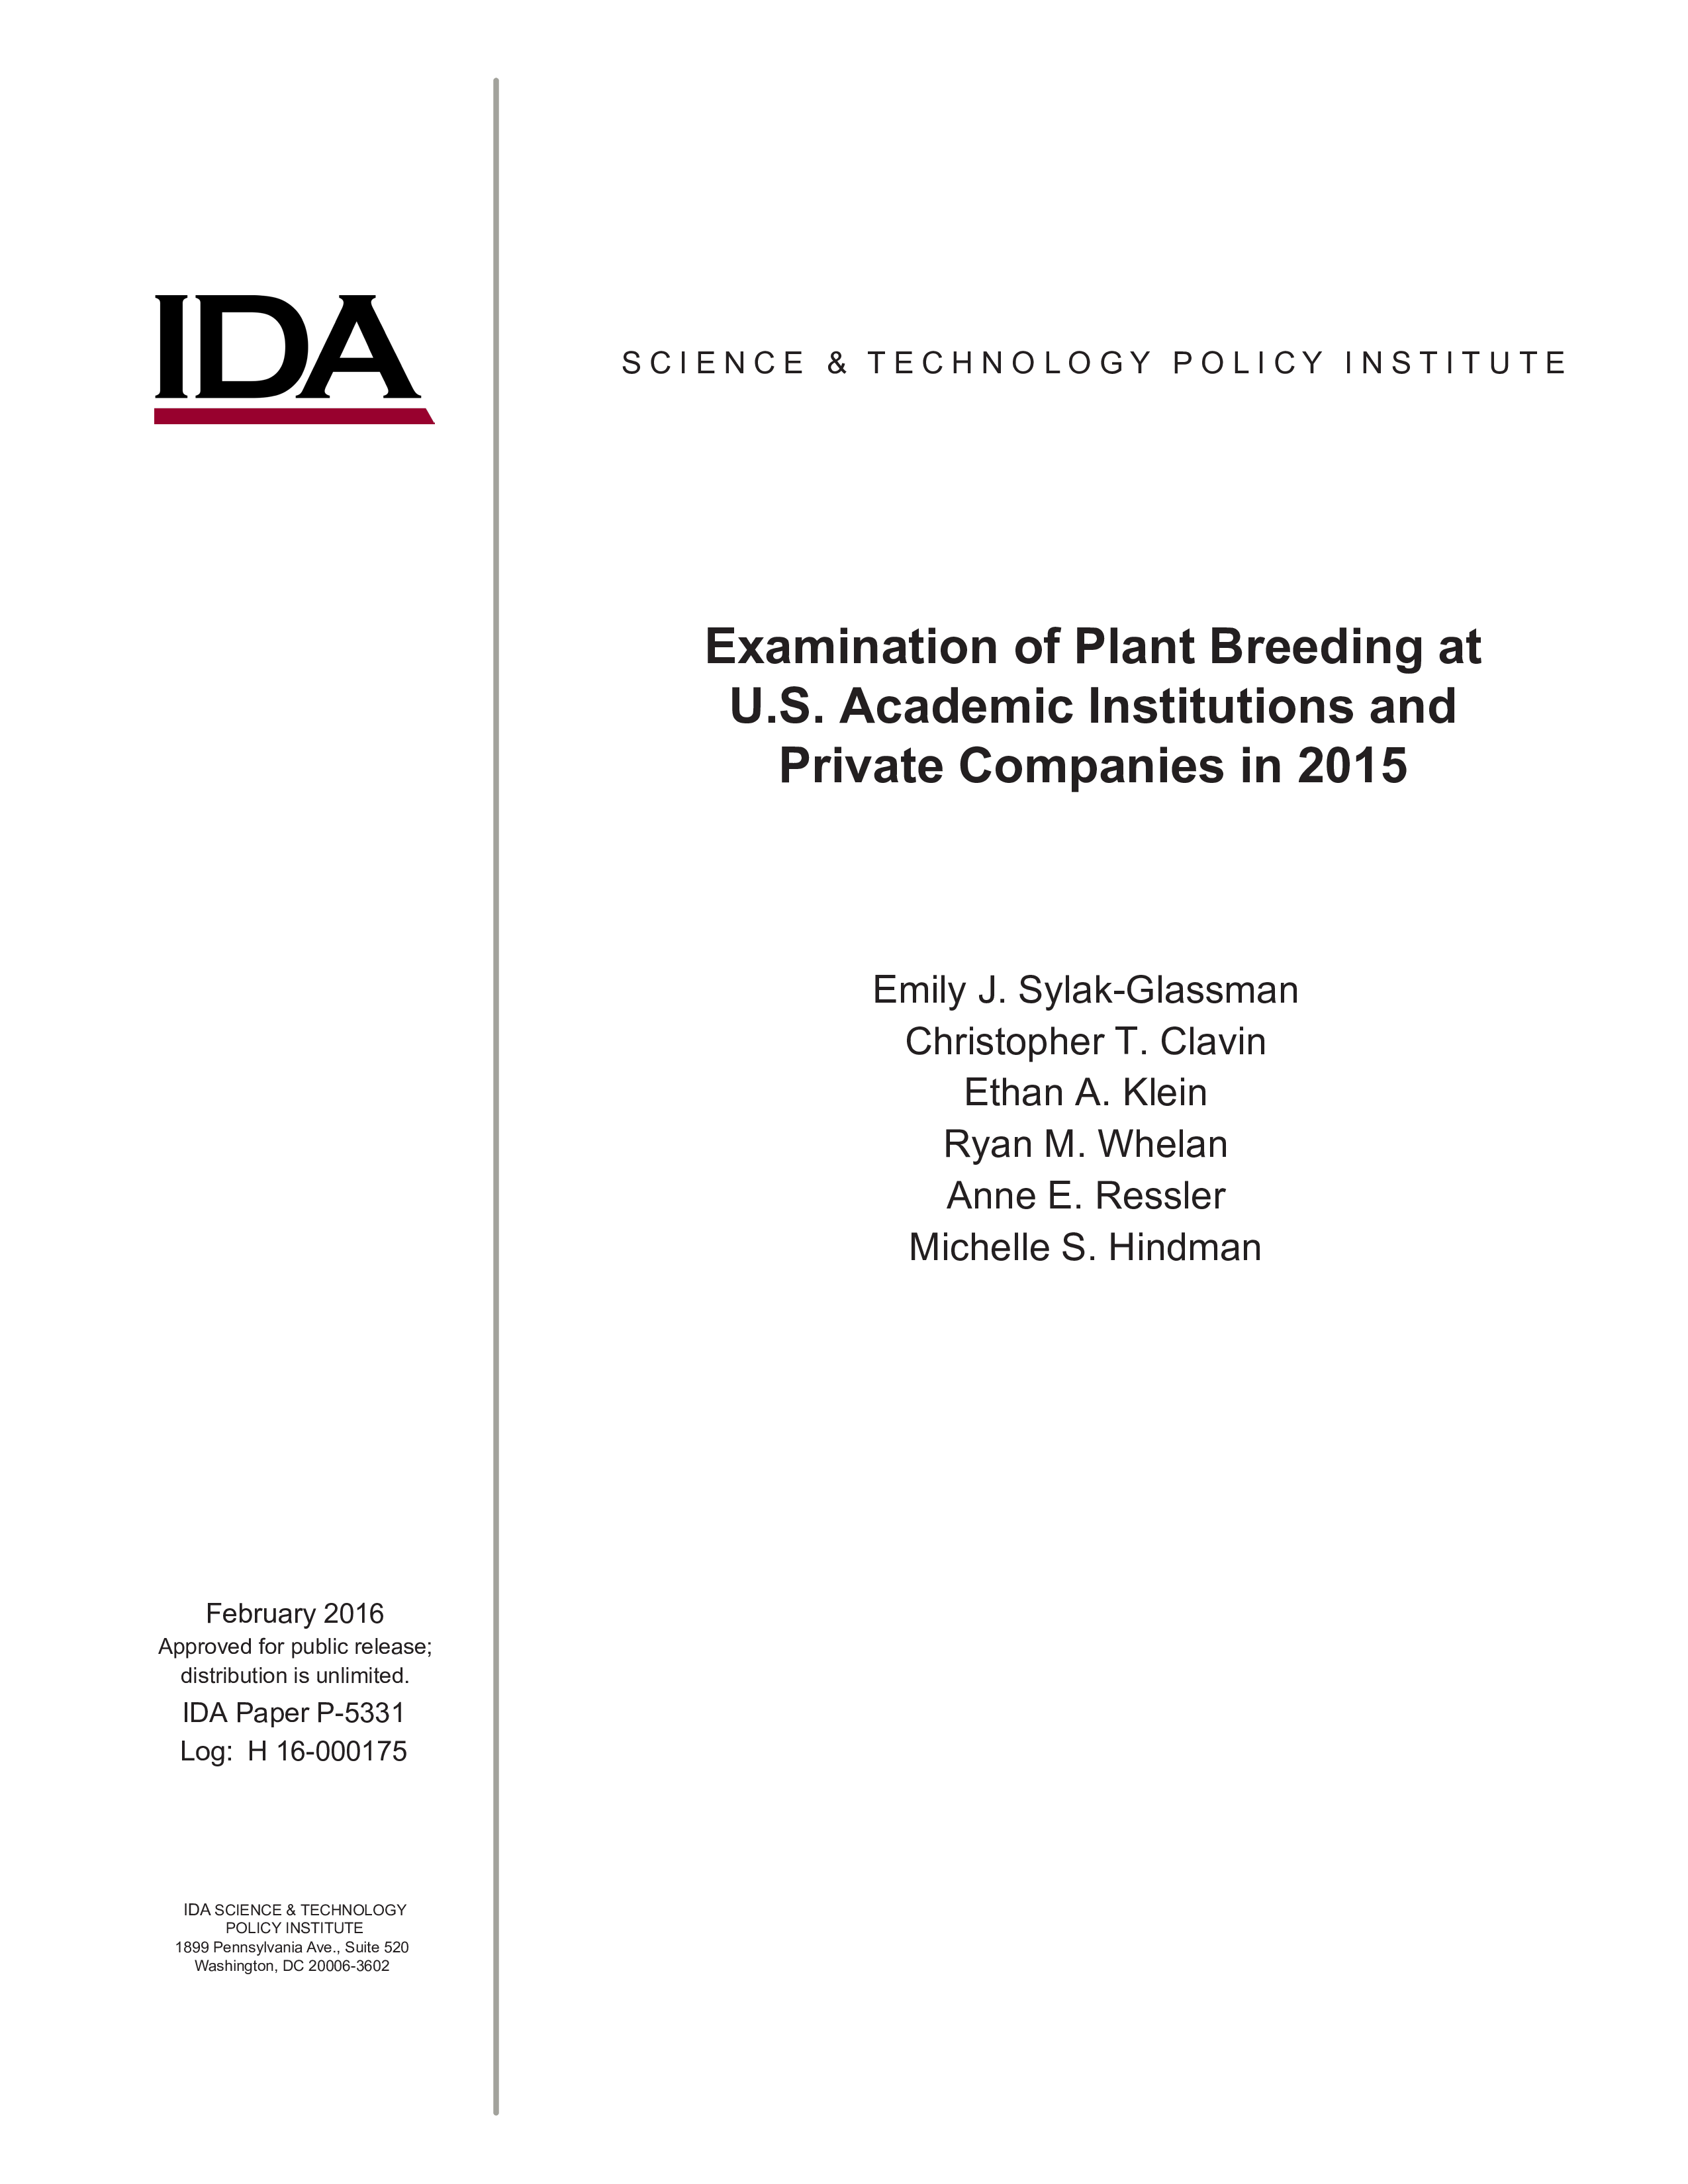 Examination of Plant Breeding at U.S. Academic Institutions and Private Companies in 2015